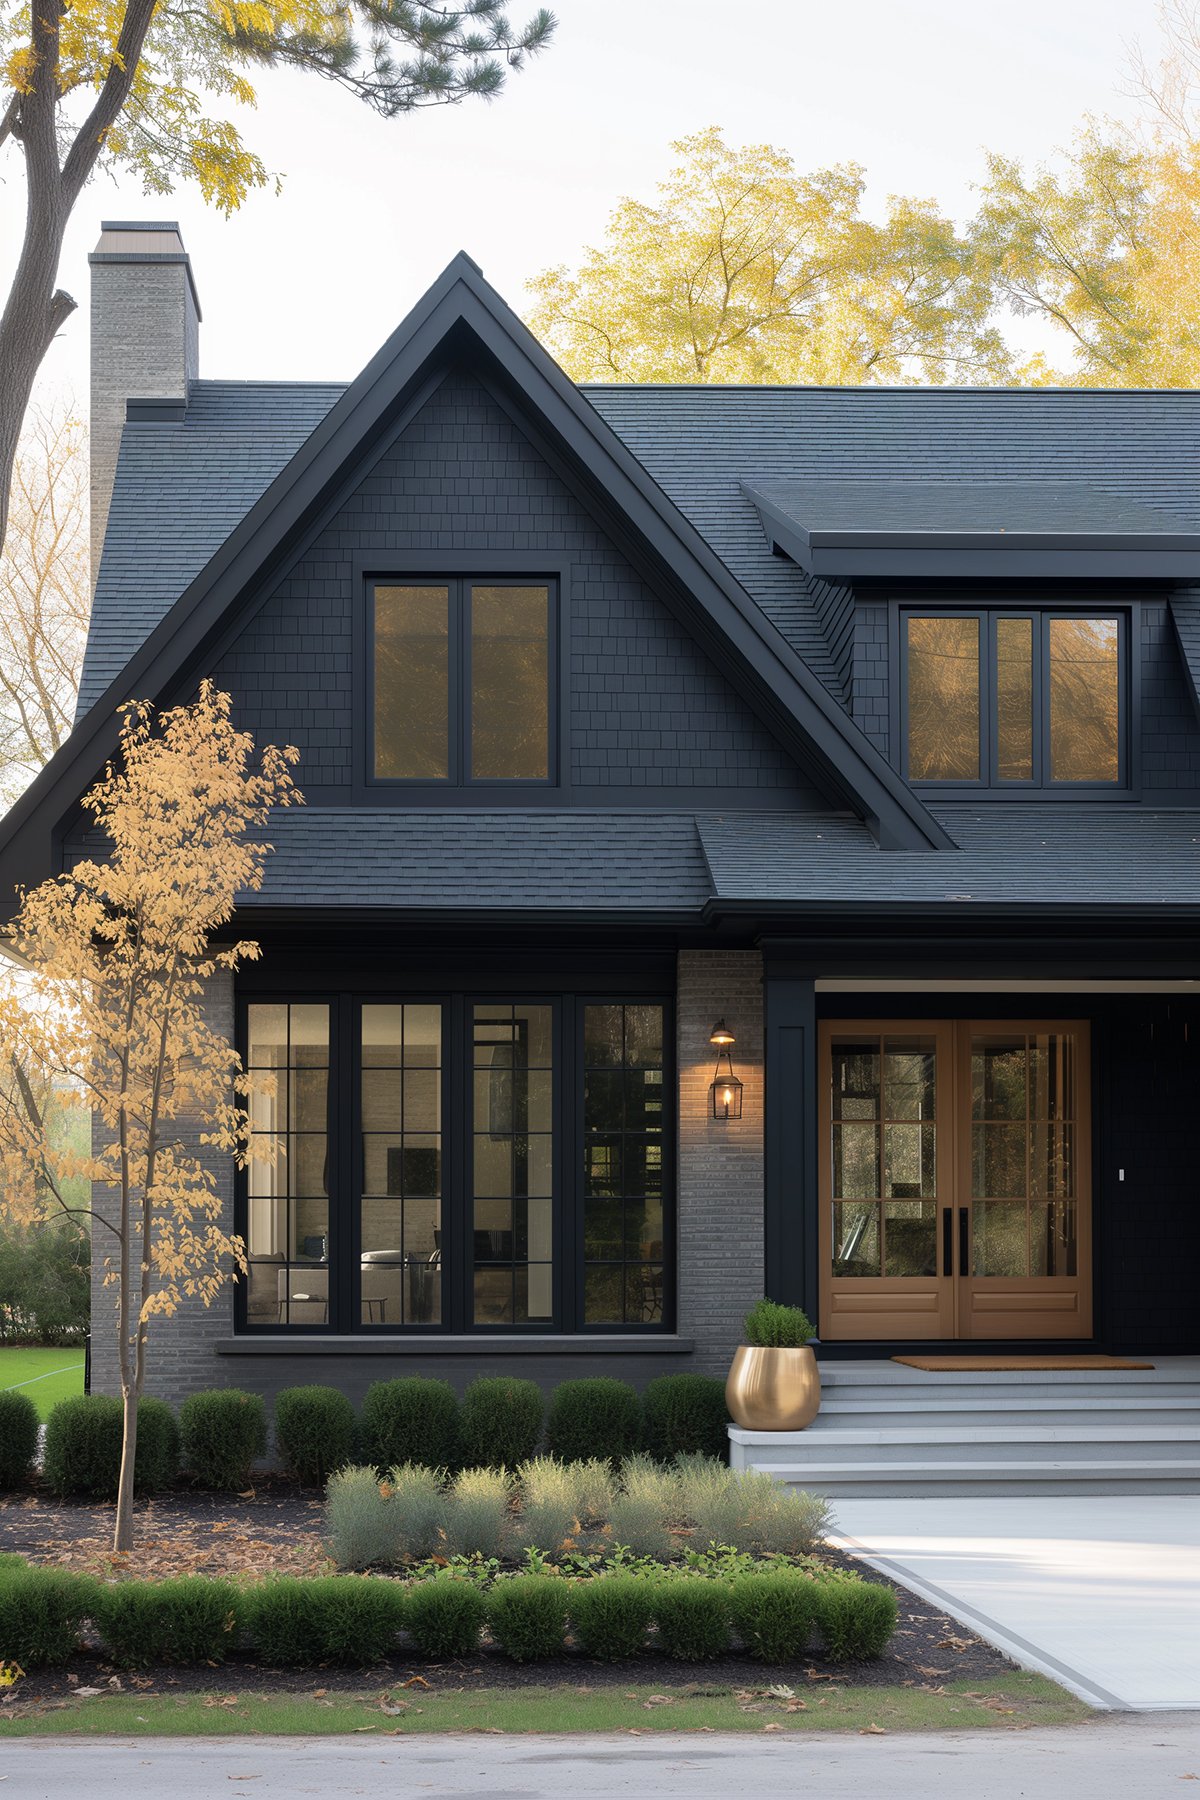 Modern house with black roof and Sherwin Williams Tricorn Black siding, dark gray brick, black windows and a wooden front door.